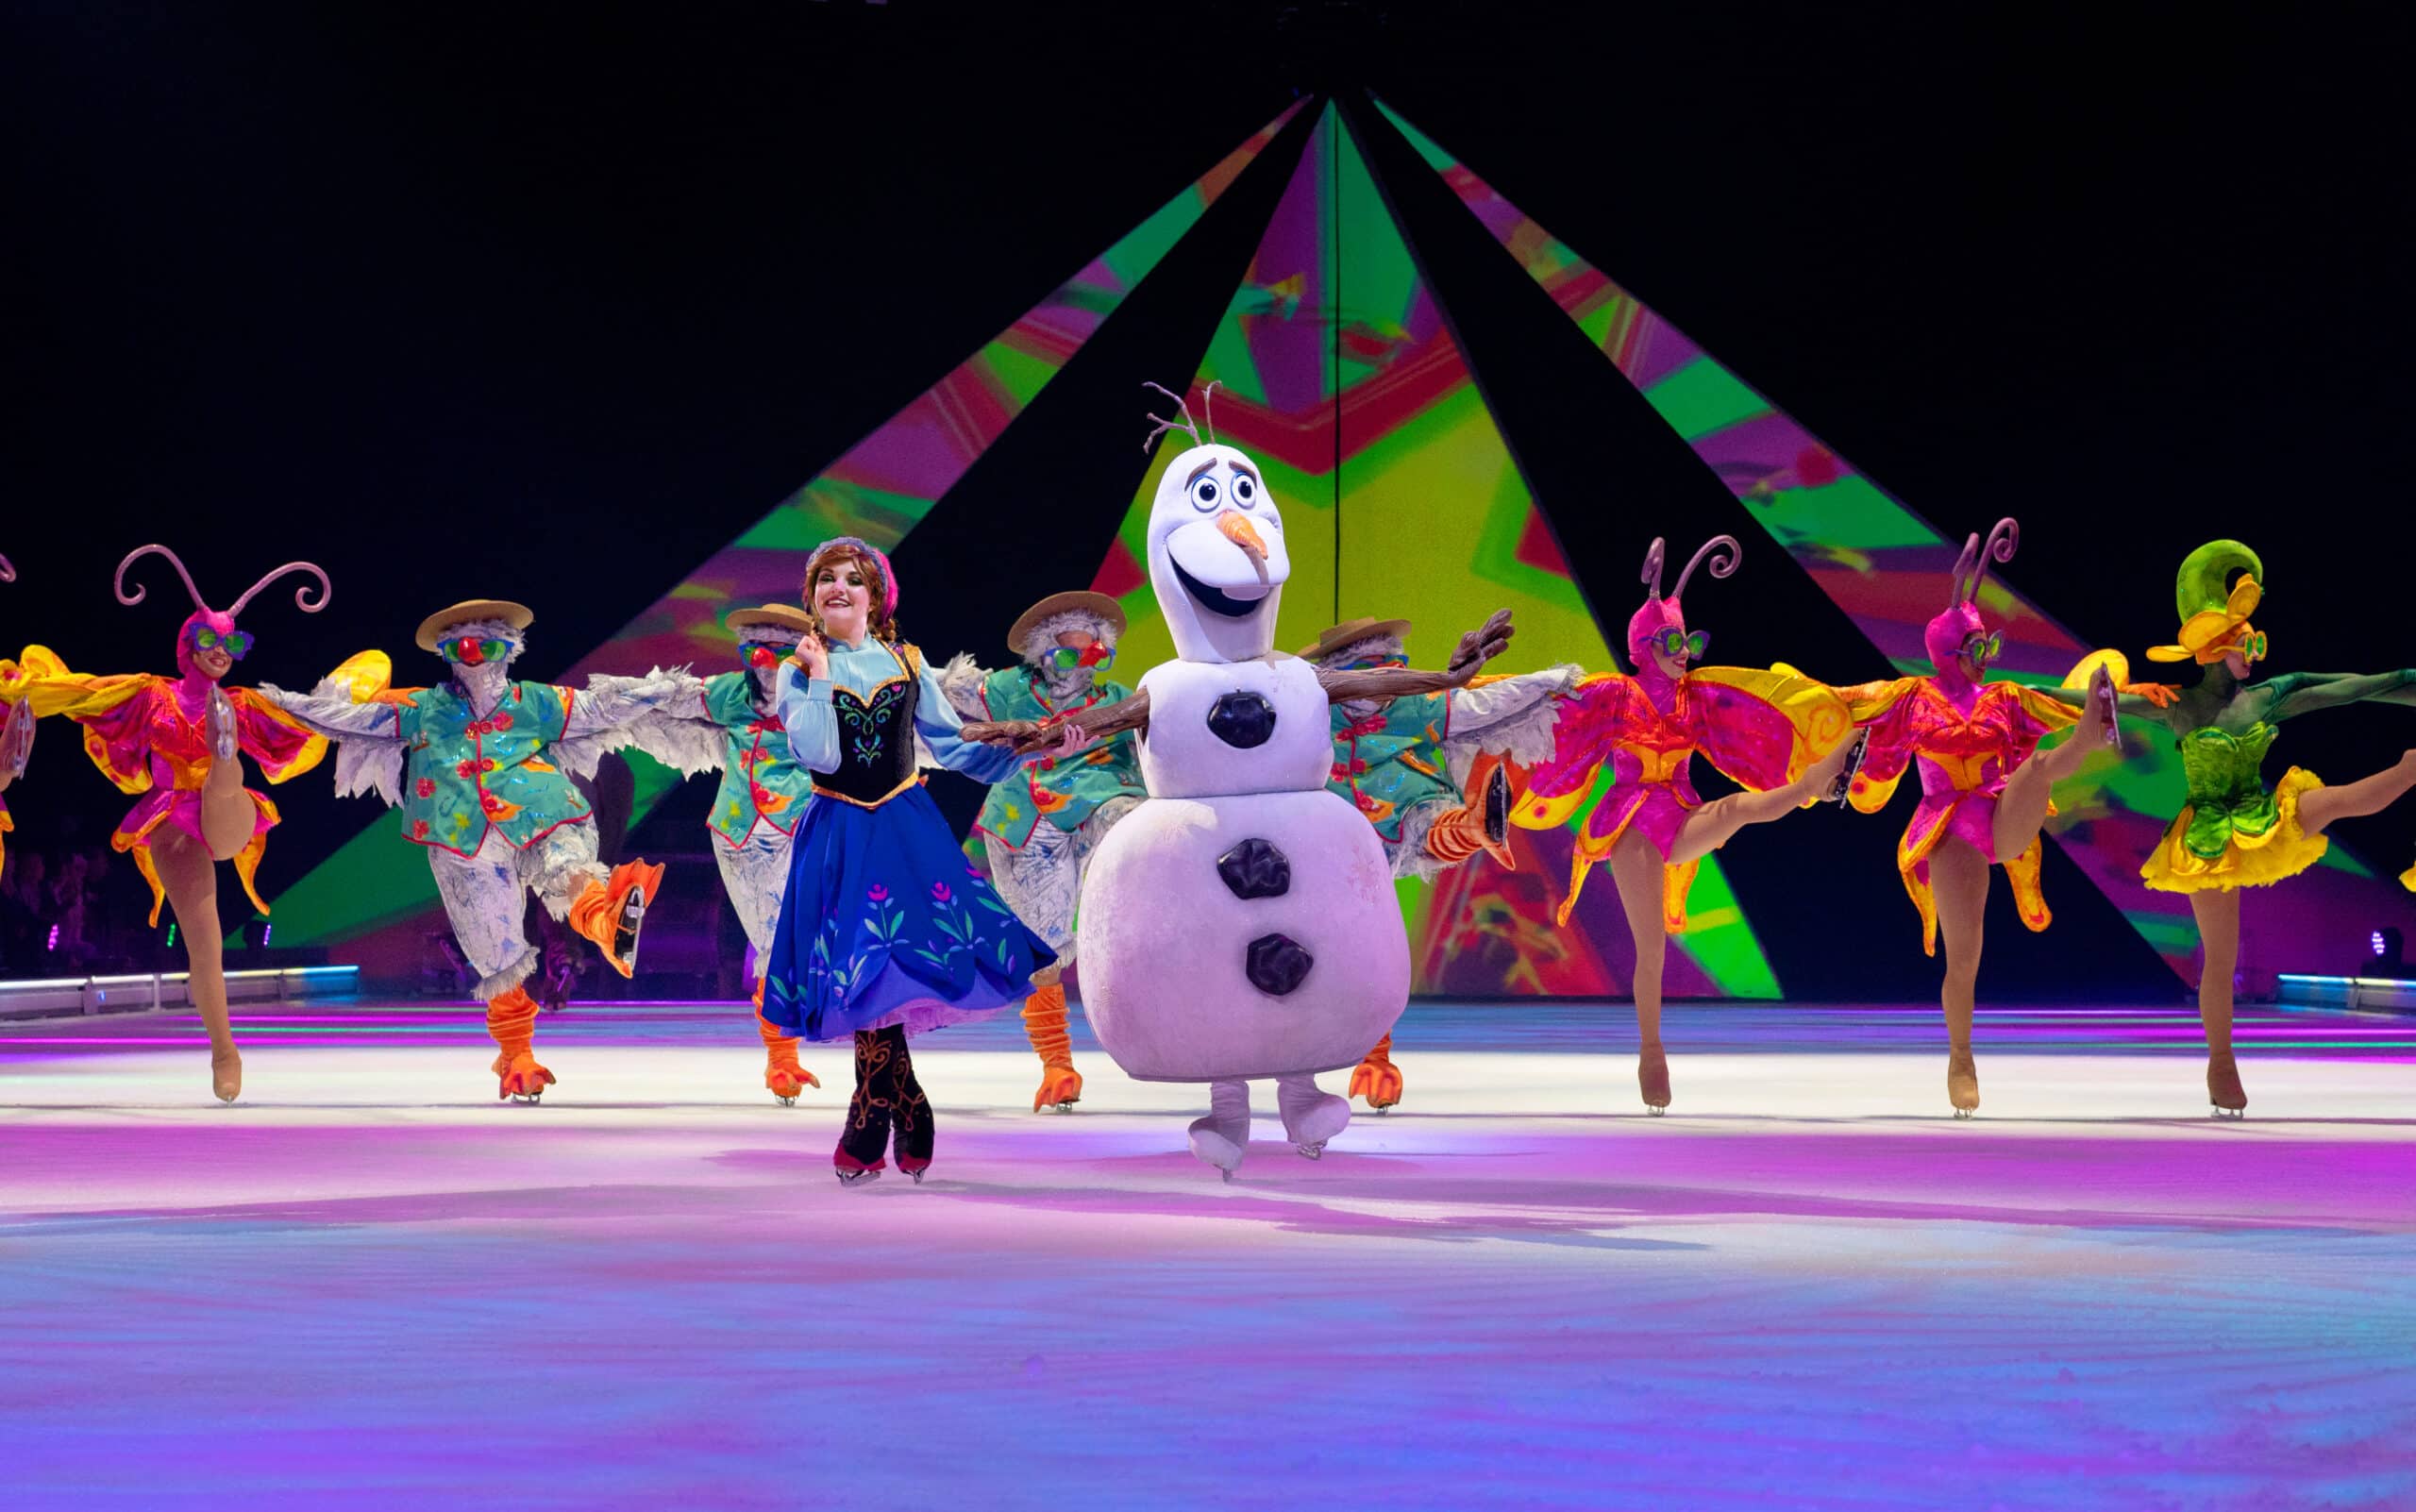 See the Madrigal Family Live: Disney On Ice Presents Frozen & Encanto